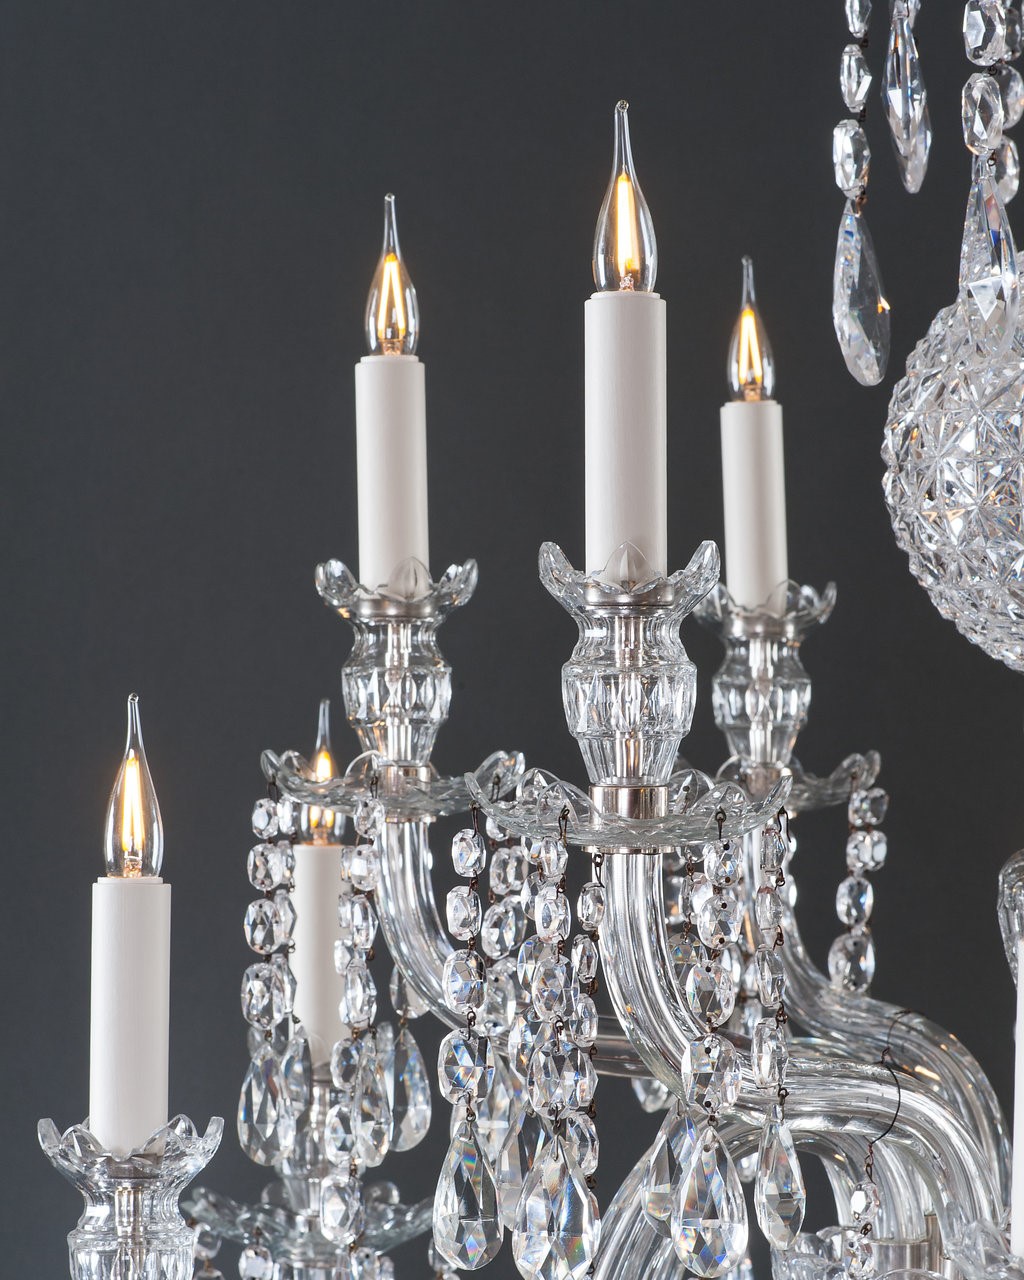 Perry & Co 12 Branch Antique Crystal Chandelier 2